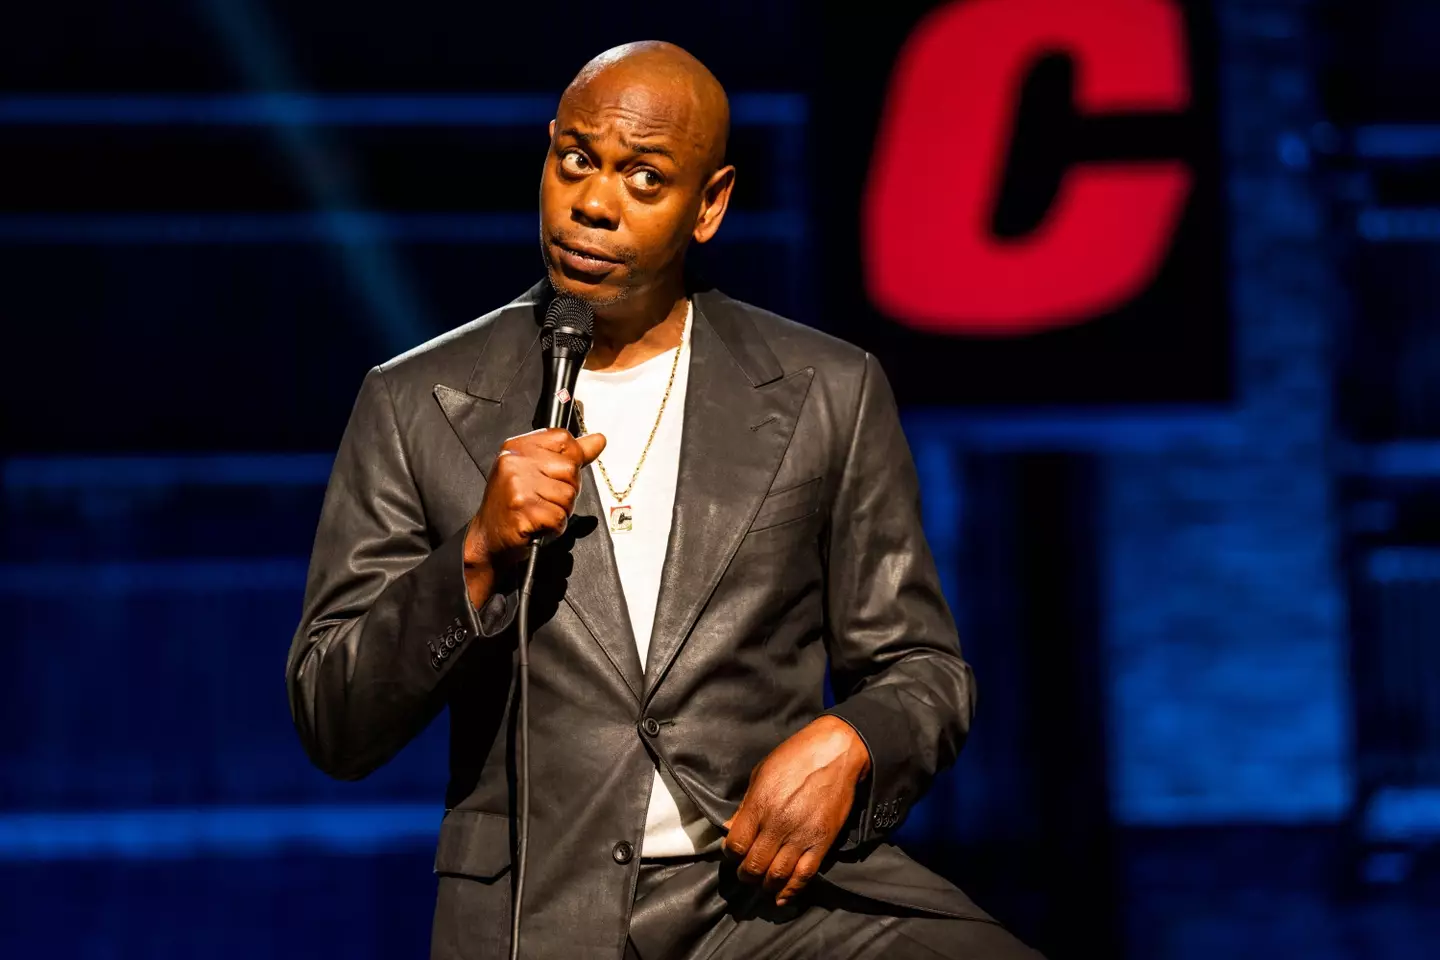 Dave Chappelle has caused controversy with LGBTQ comments.